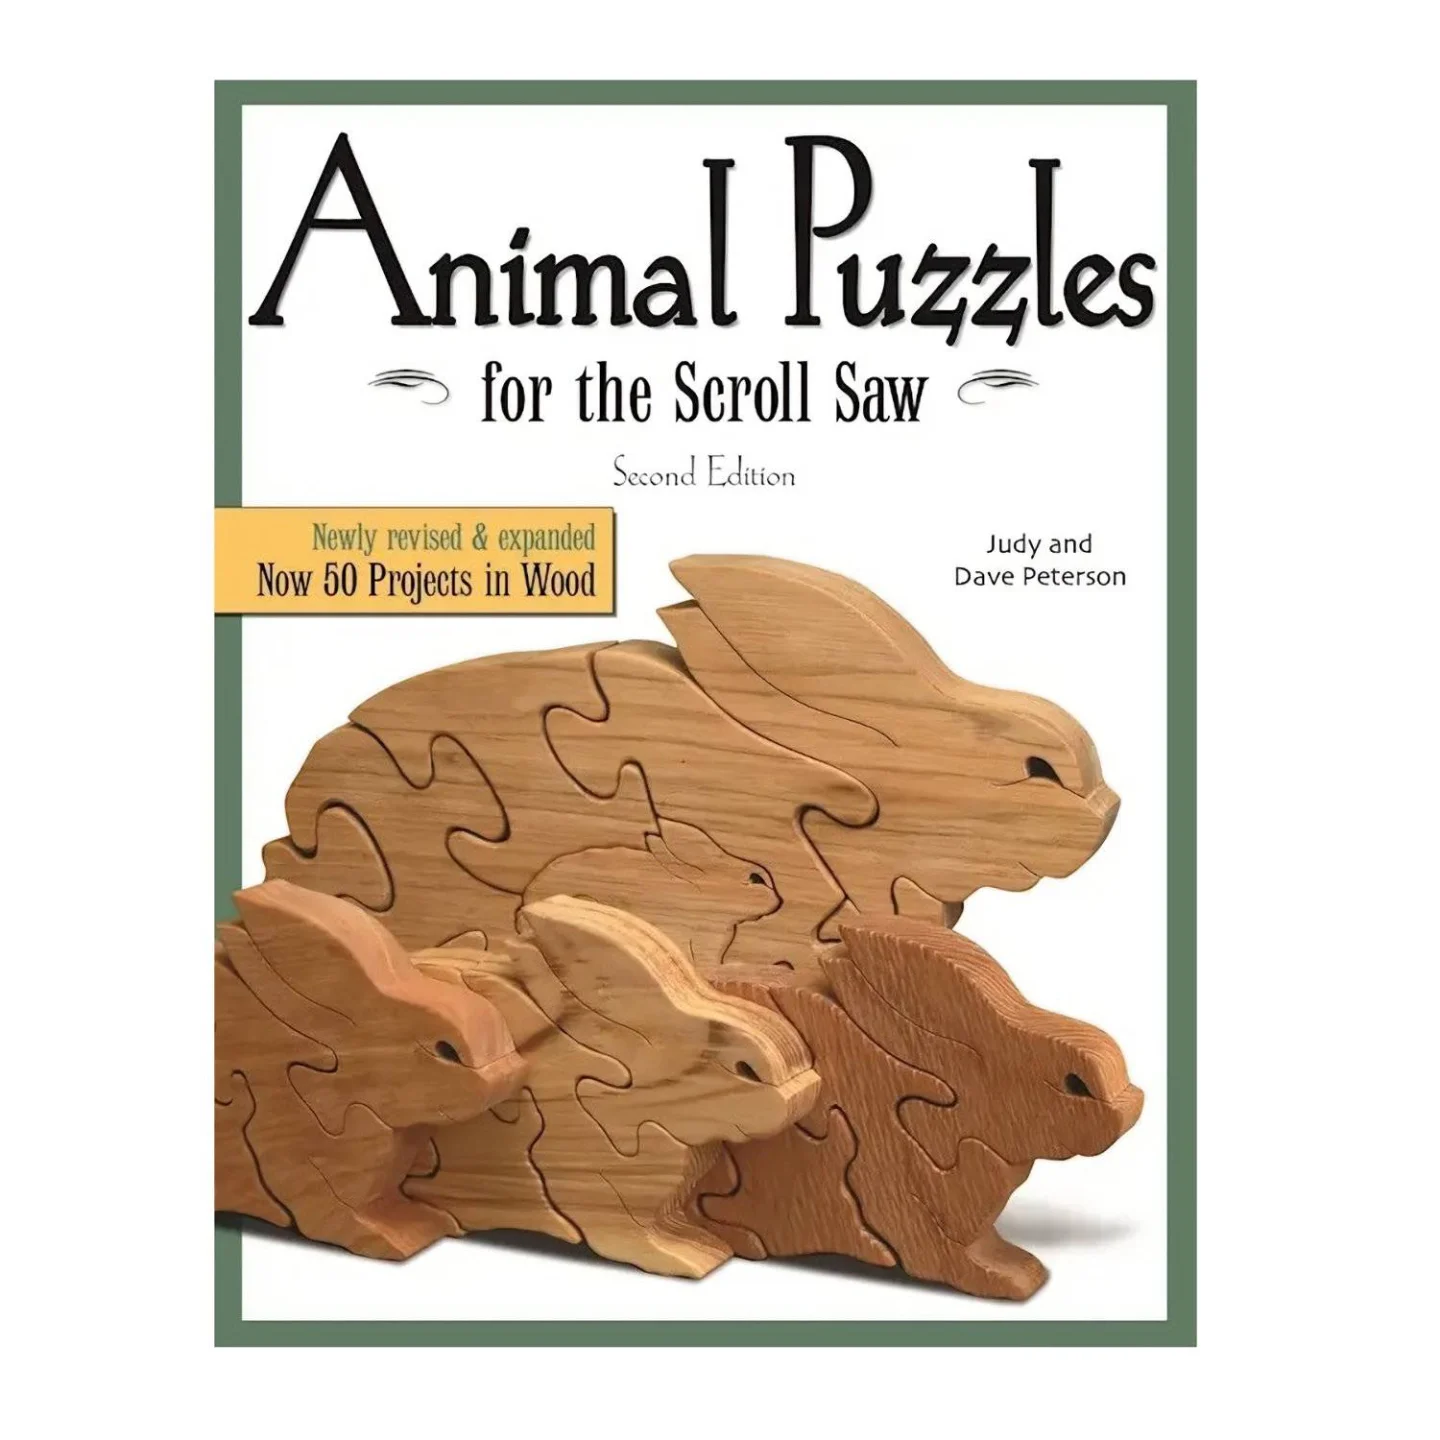 Animal-Puzzles-for-the-Scroll-Saw.